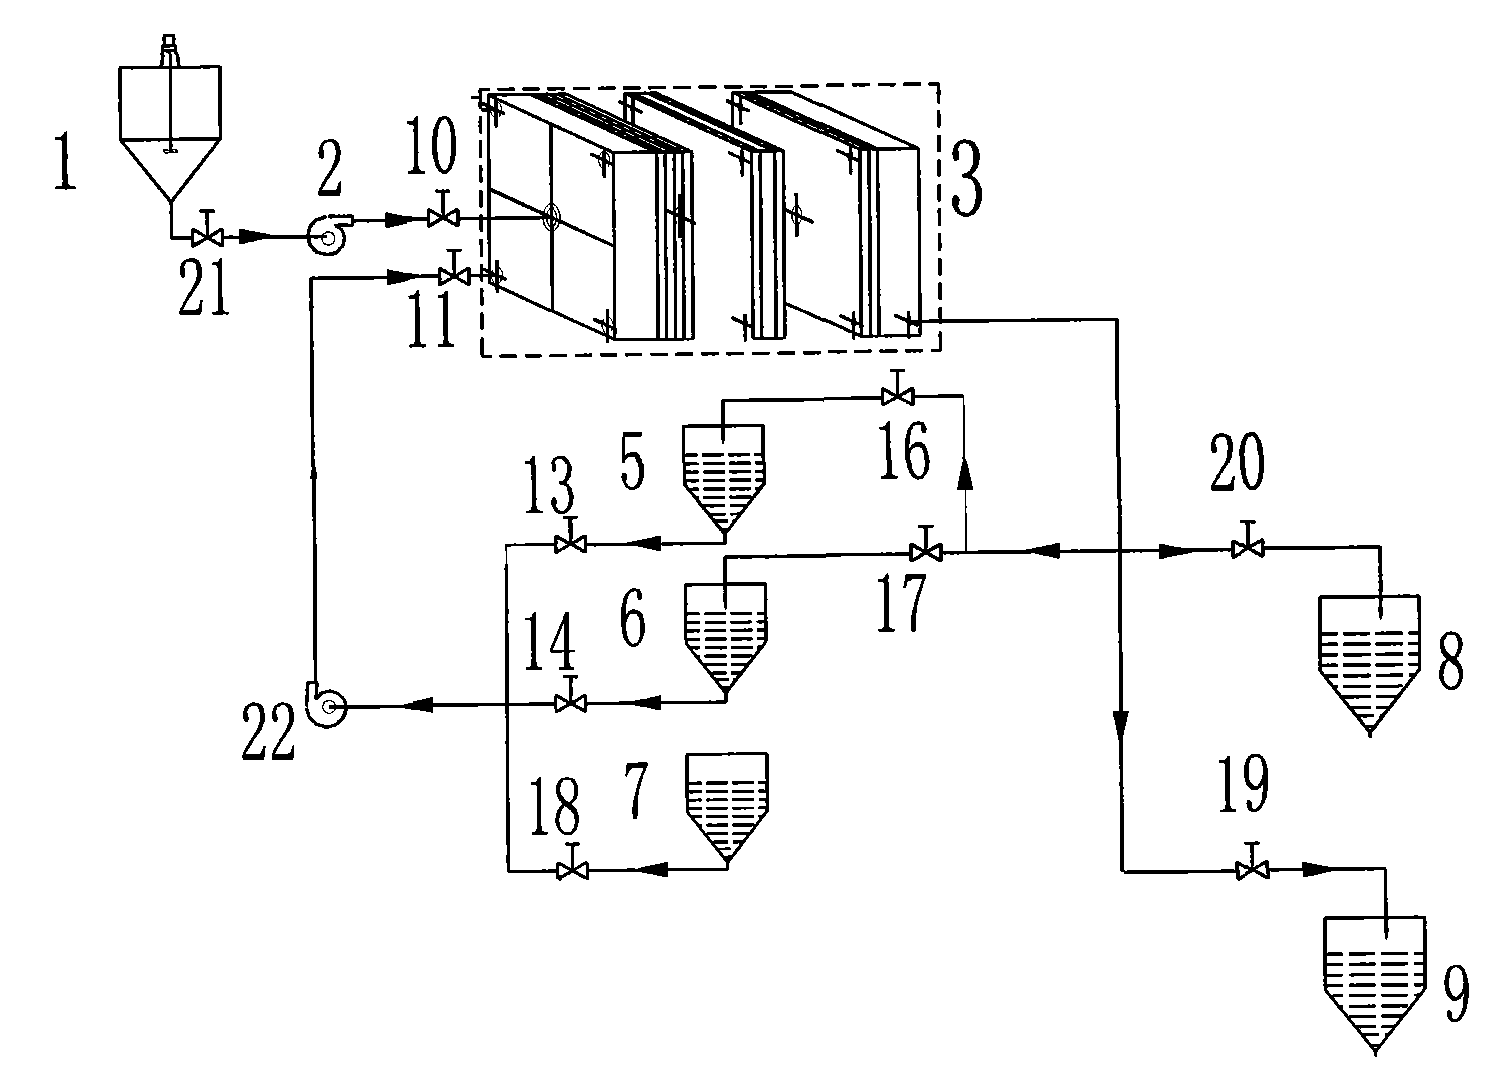 Multisection acid leaching, multistage countercurrent washing and filter pressing integrated system and method